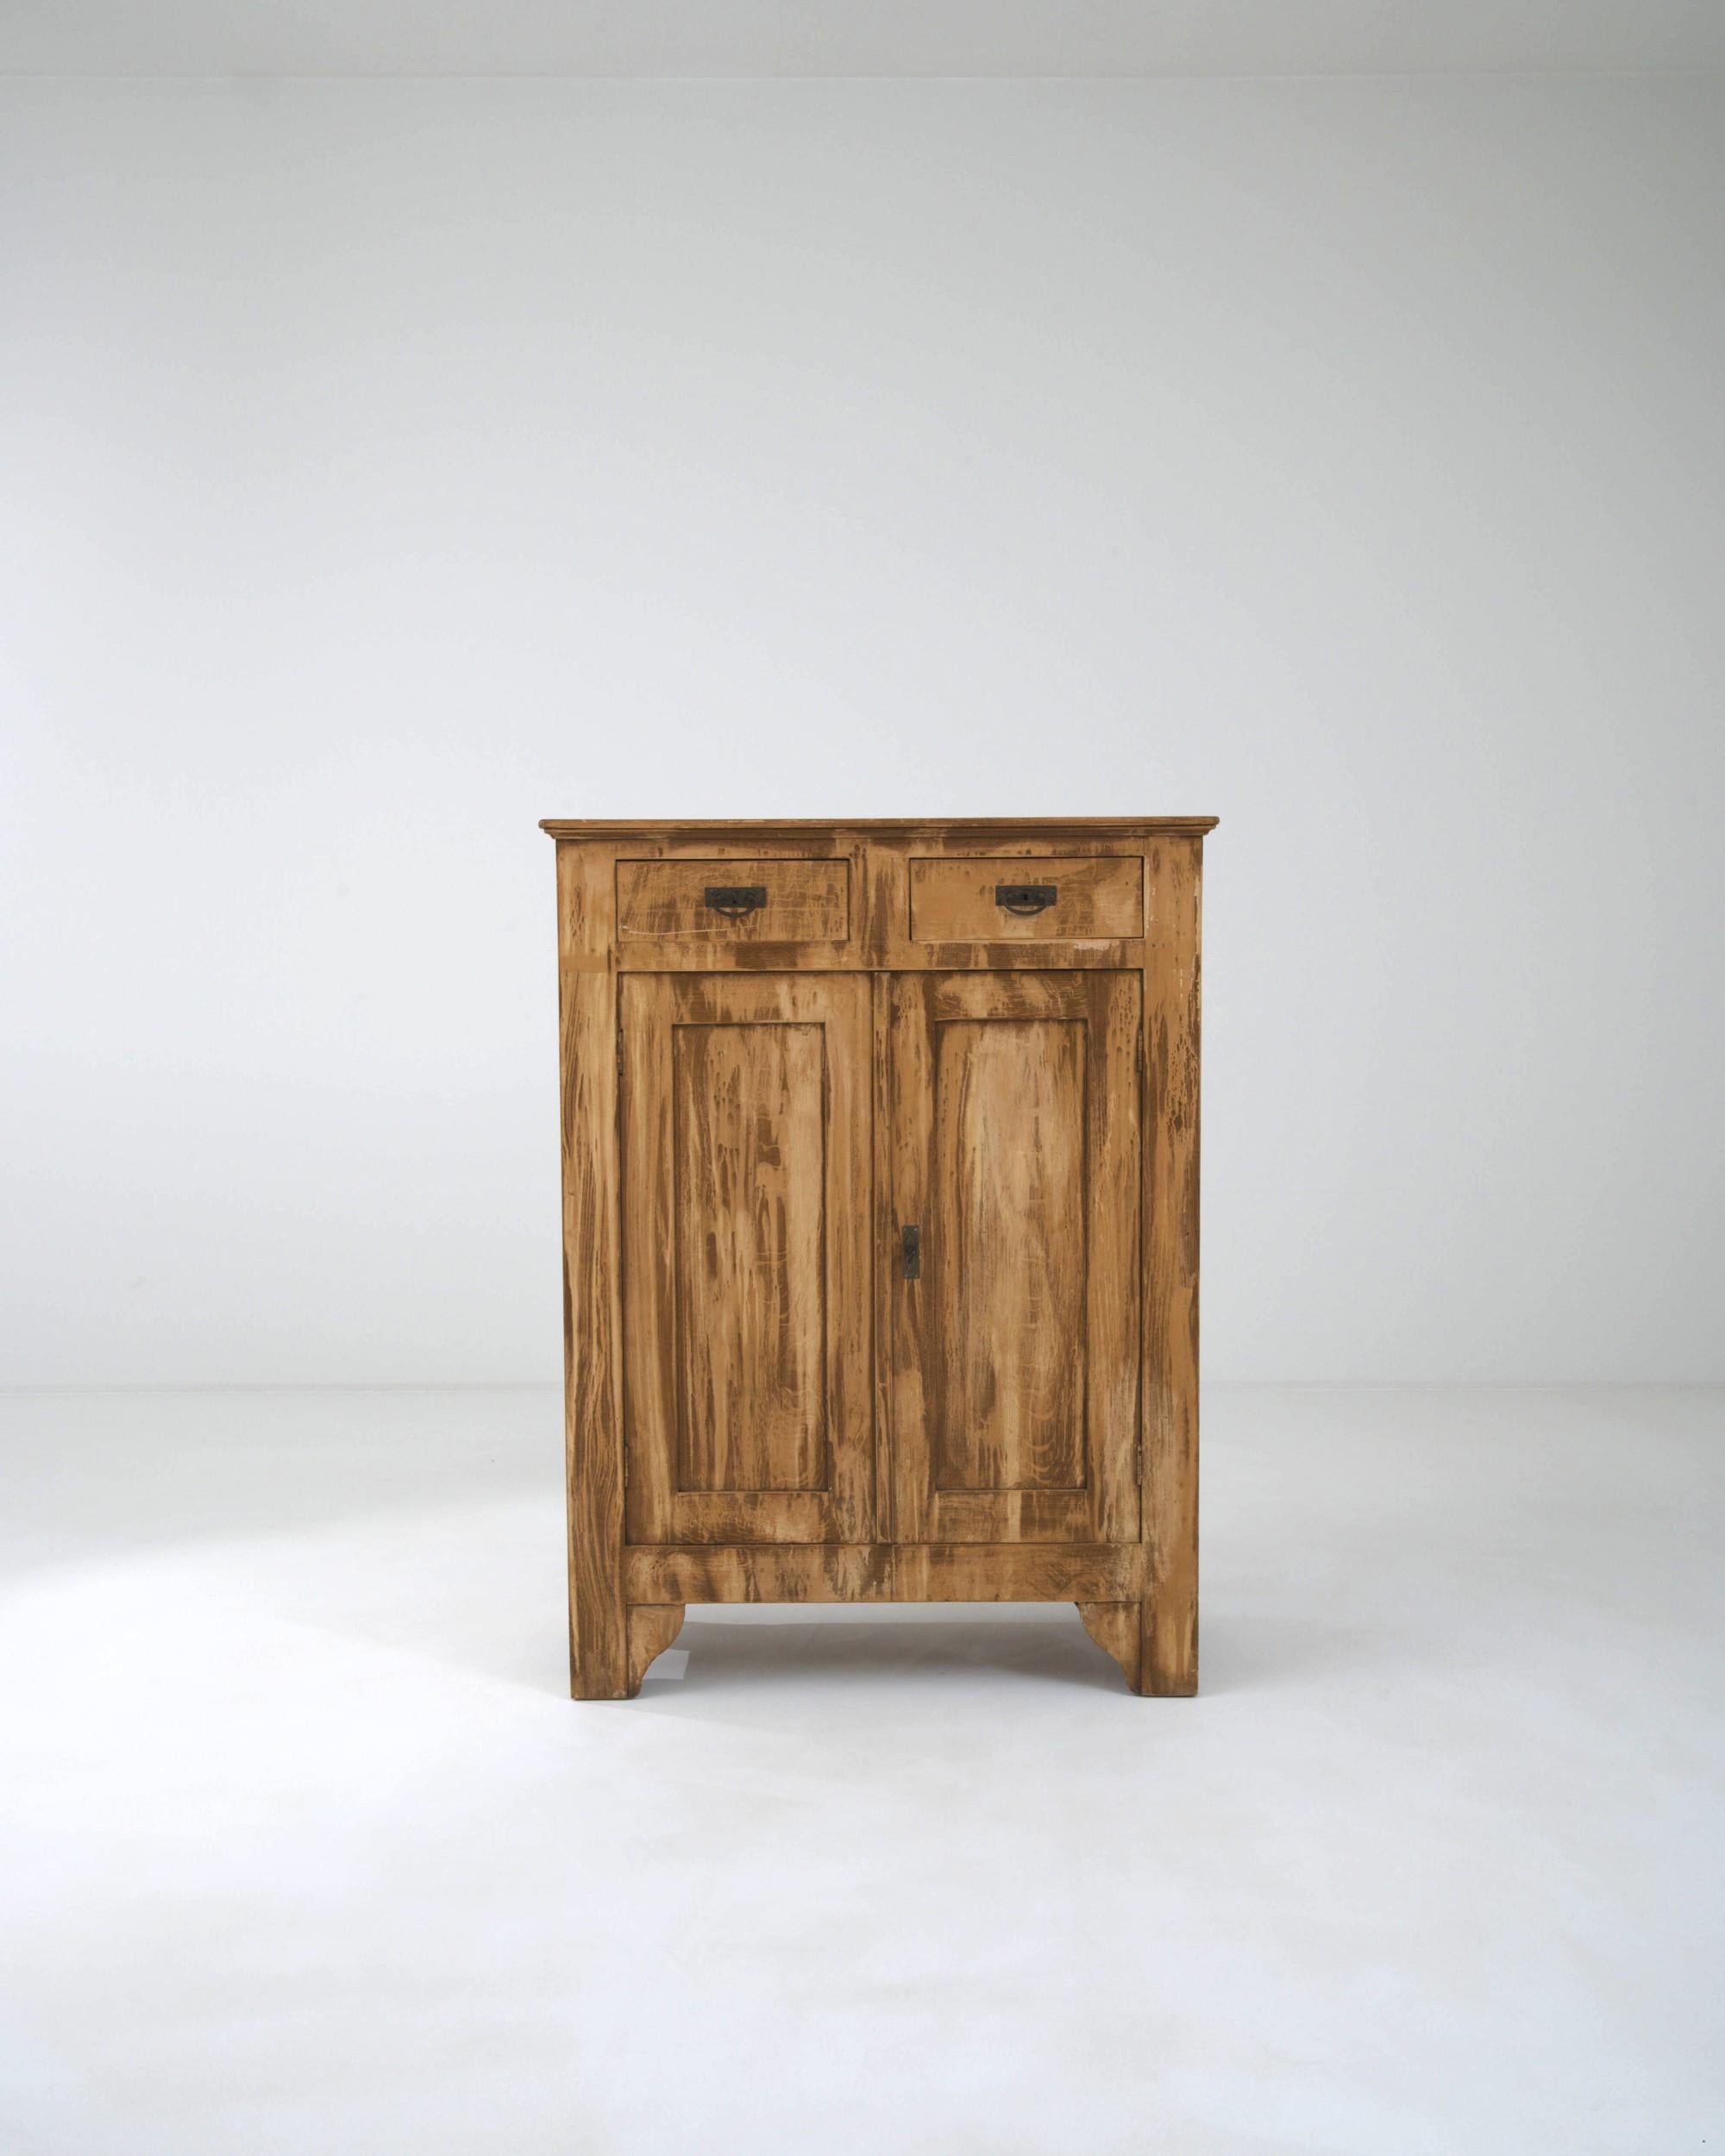 Combining clean lines with a rustic patina, this antique wooden buffet possesses a country simplicity. Built in France in the 1800s, the restrained shape of the upright cabinet makes the rough strokes of the patinated wood all the more striking.